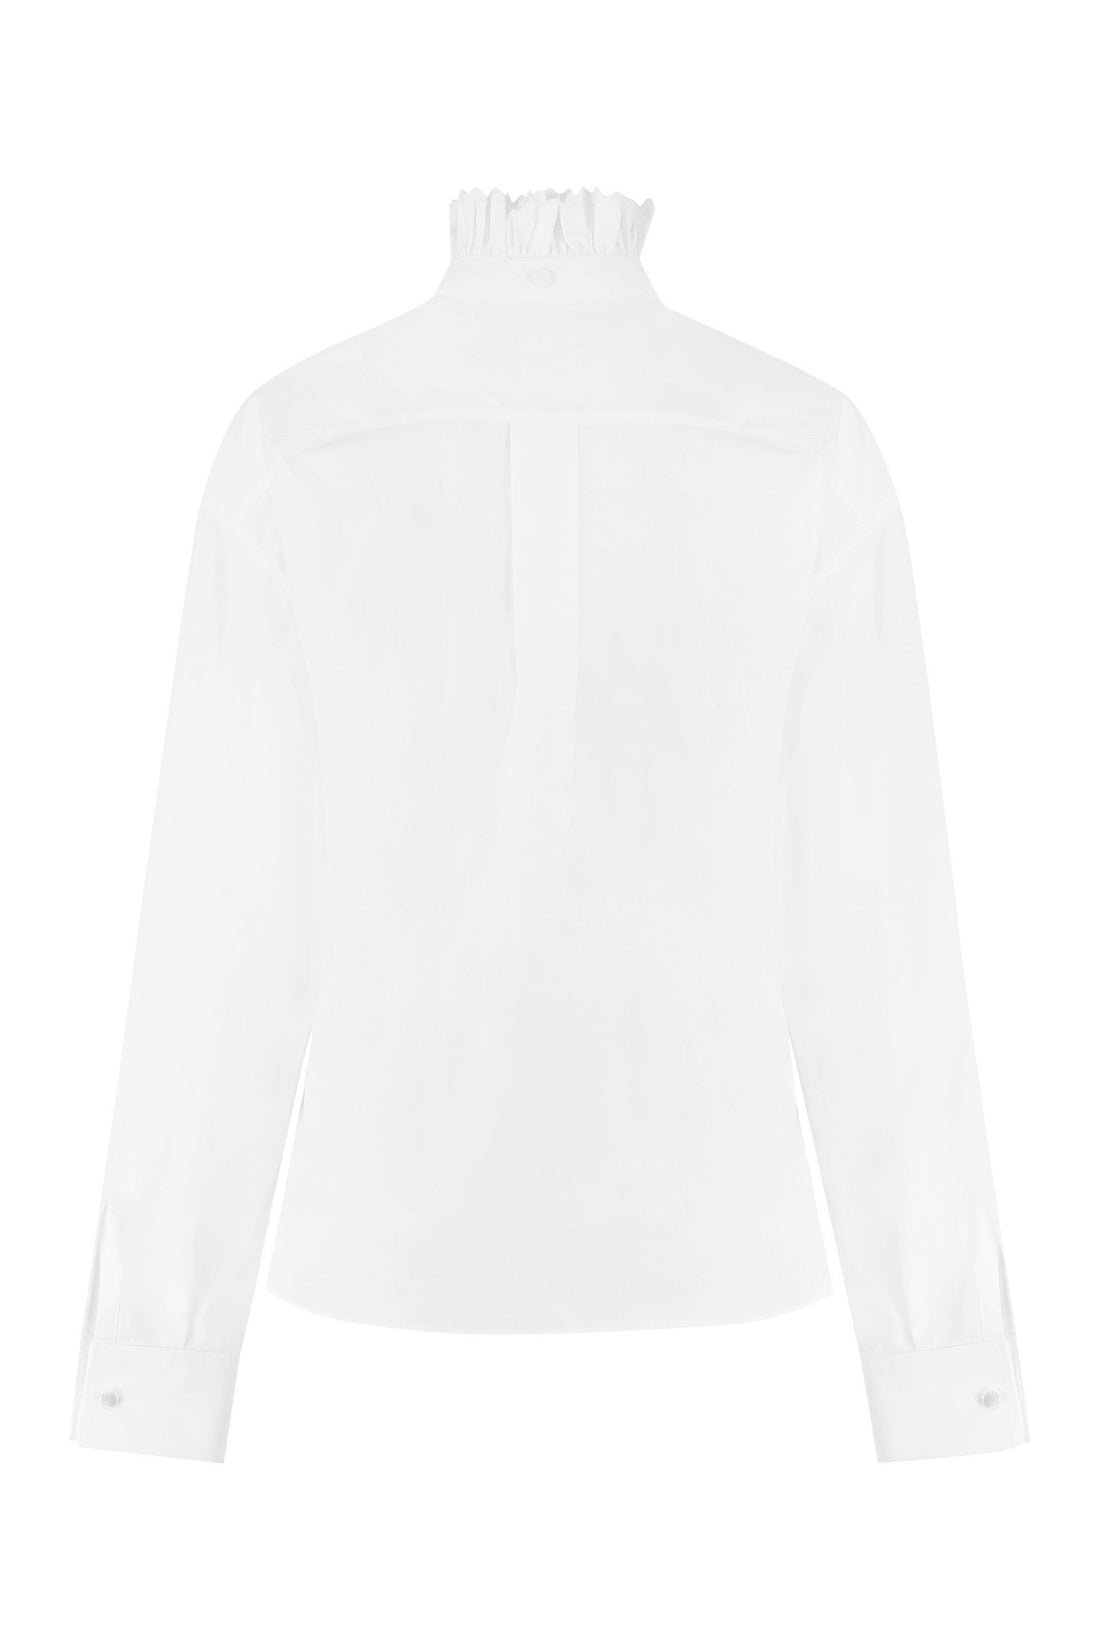 Philosophy di Lorenzo Serafini-OUTLET-SALE-Cotton shirt with bow-ARCHIVIST